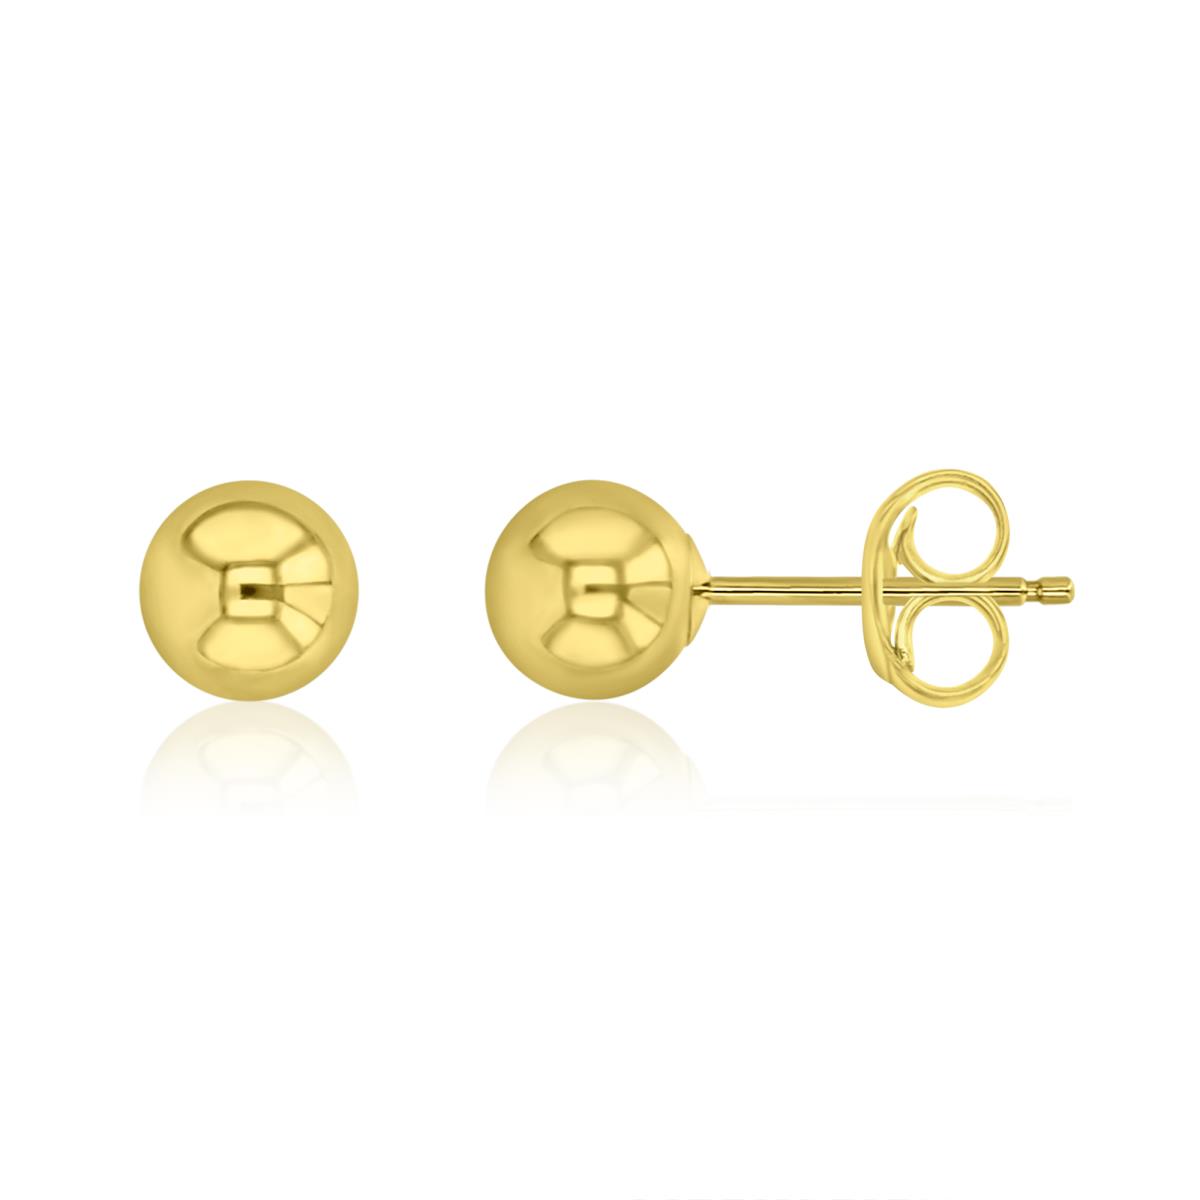 14K Yellow Gold 5mm Ball Solid Post Stud Earrings with 6mm Gold Butterfly Backs